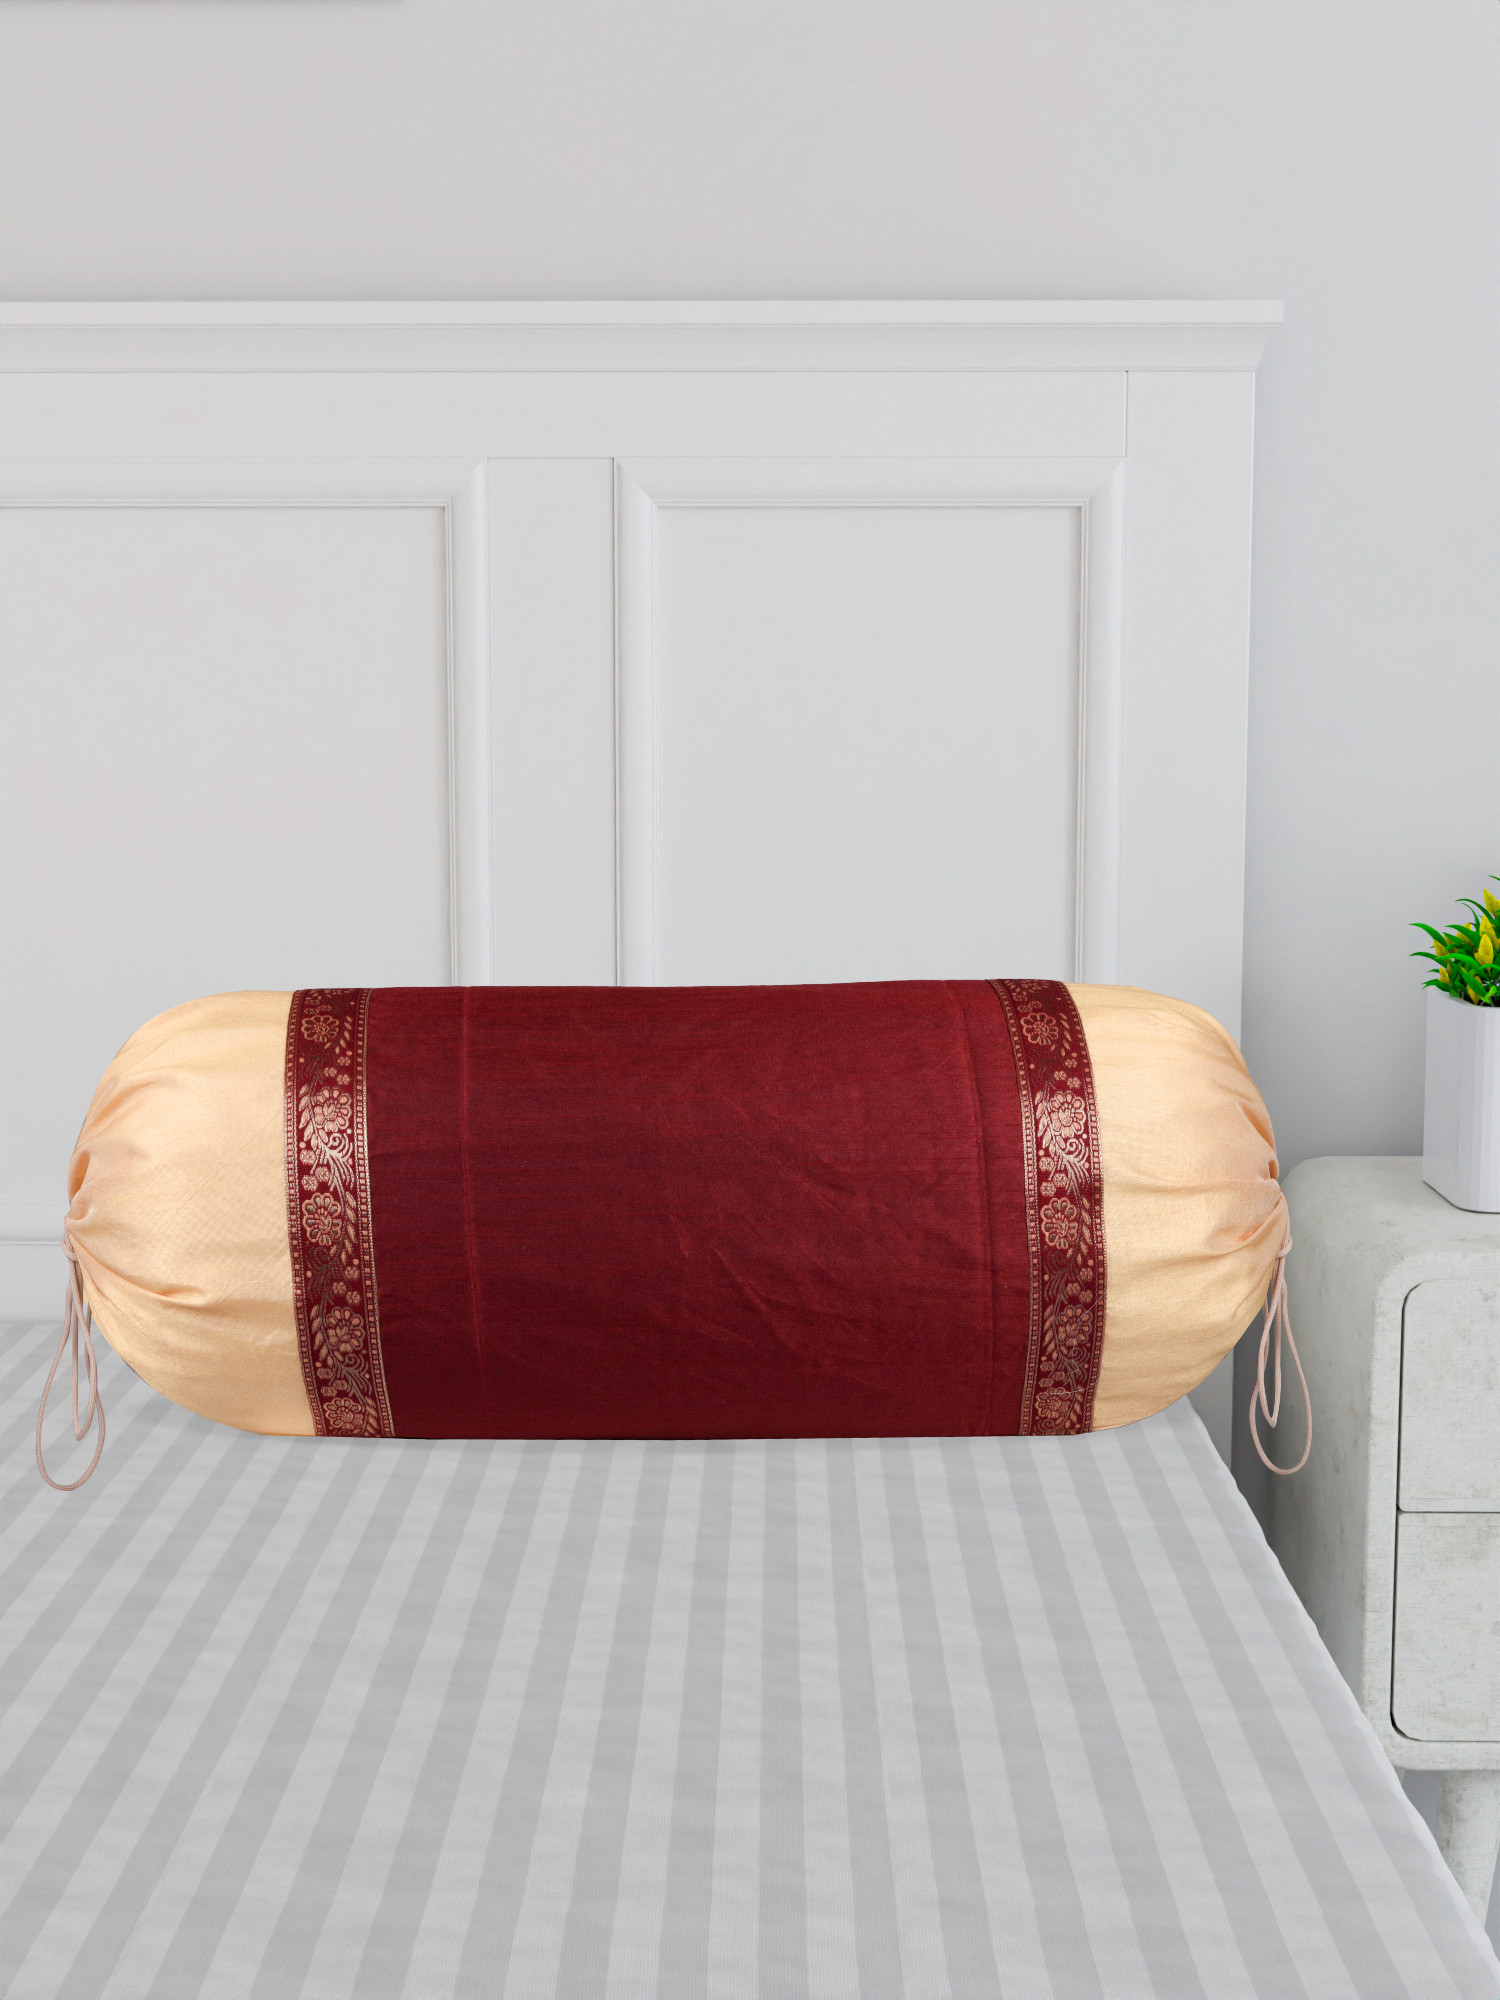 Kuber Industries Bolster Covers | Dupion Polyester Bolster Cover Set | Diwan Bolster Cover Set | Bolster Pillow Cover | Lace Design Masand Cover | 16x32 Inch | Pack of 2 | Maroon